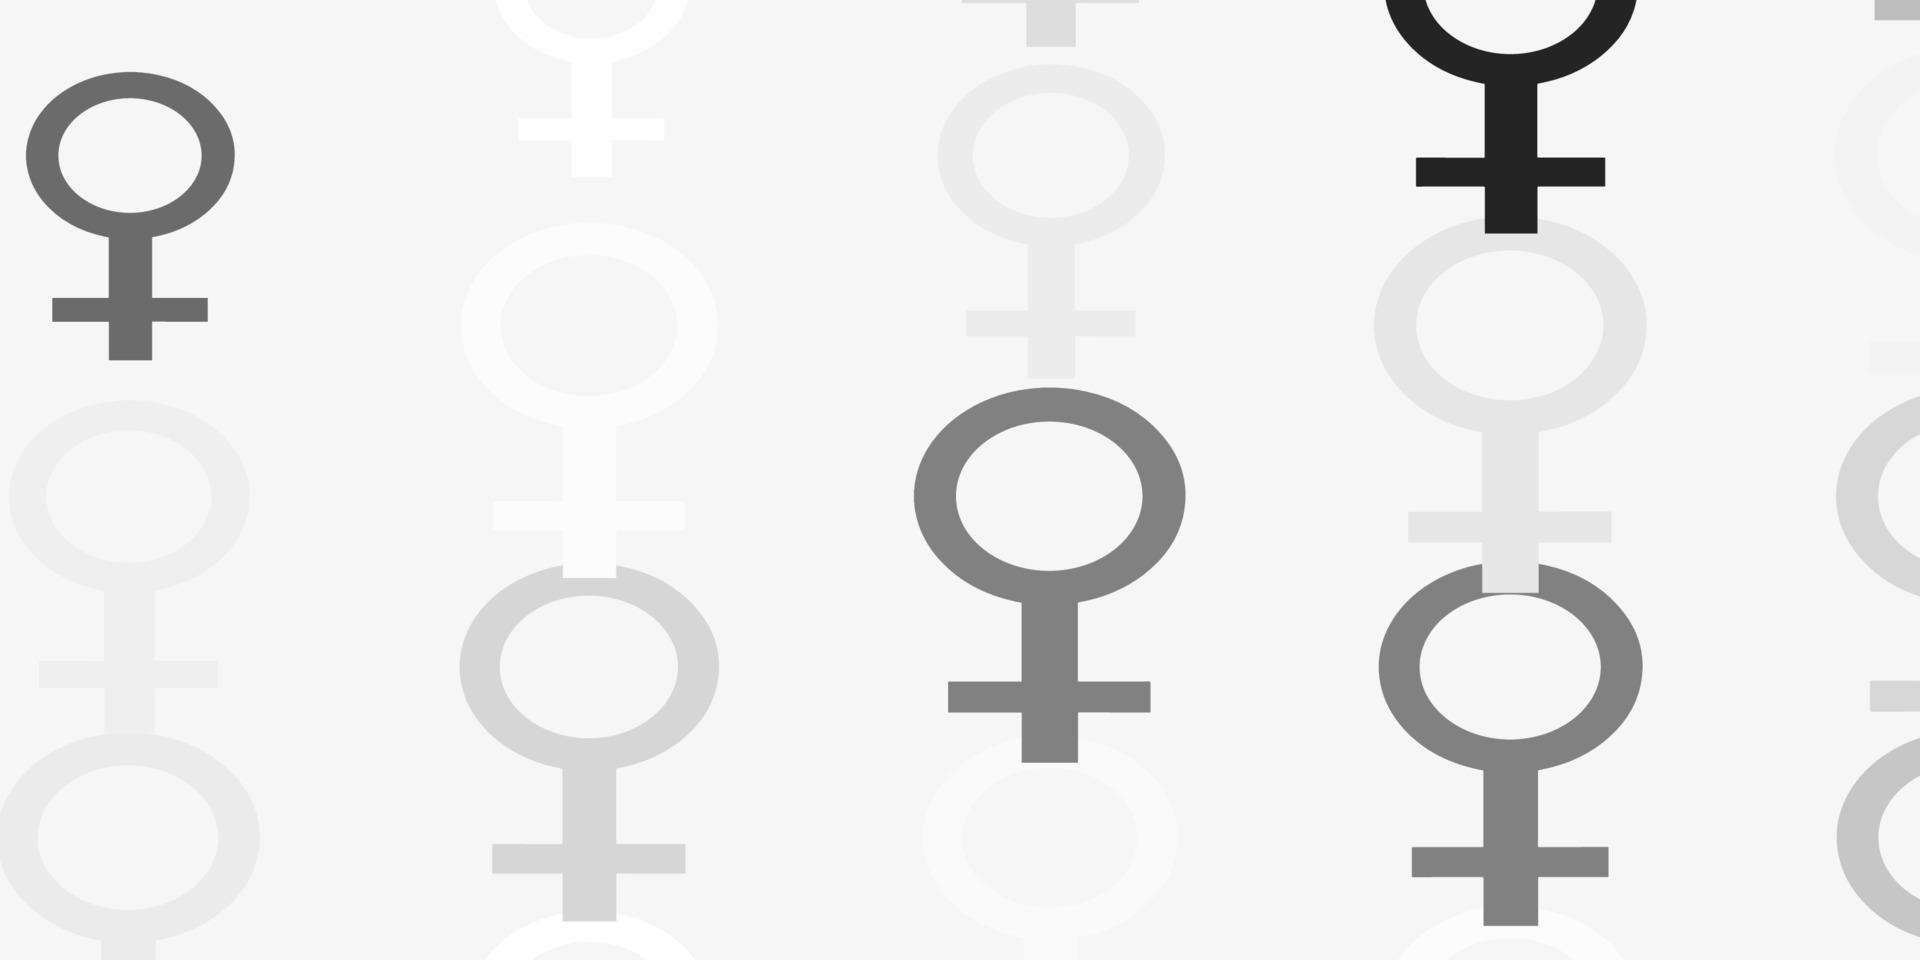 Light Gray vector pattern with feminism elements.